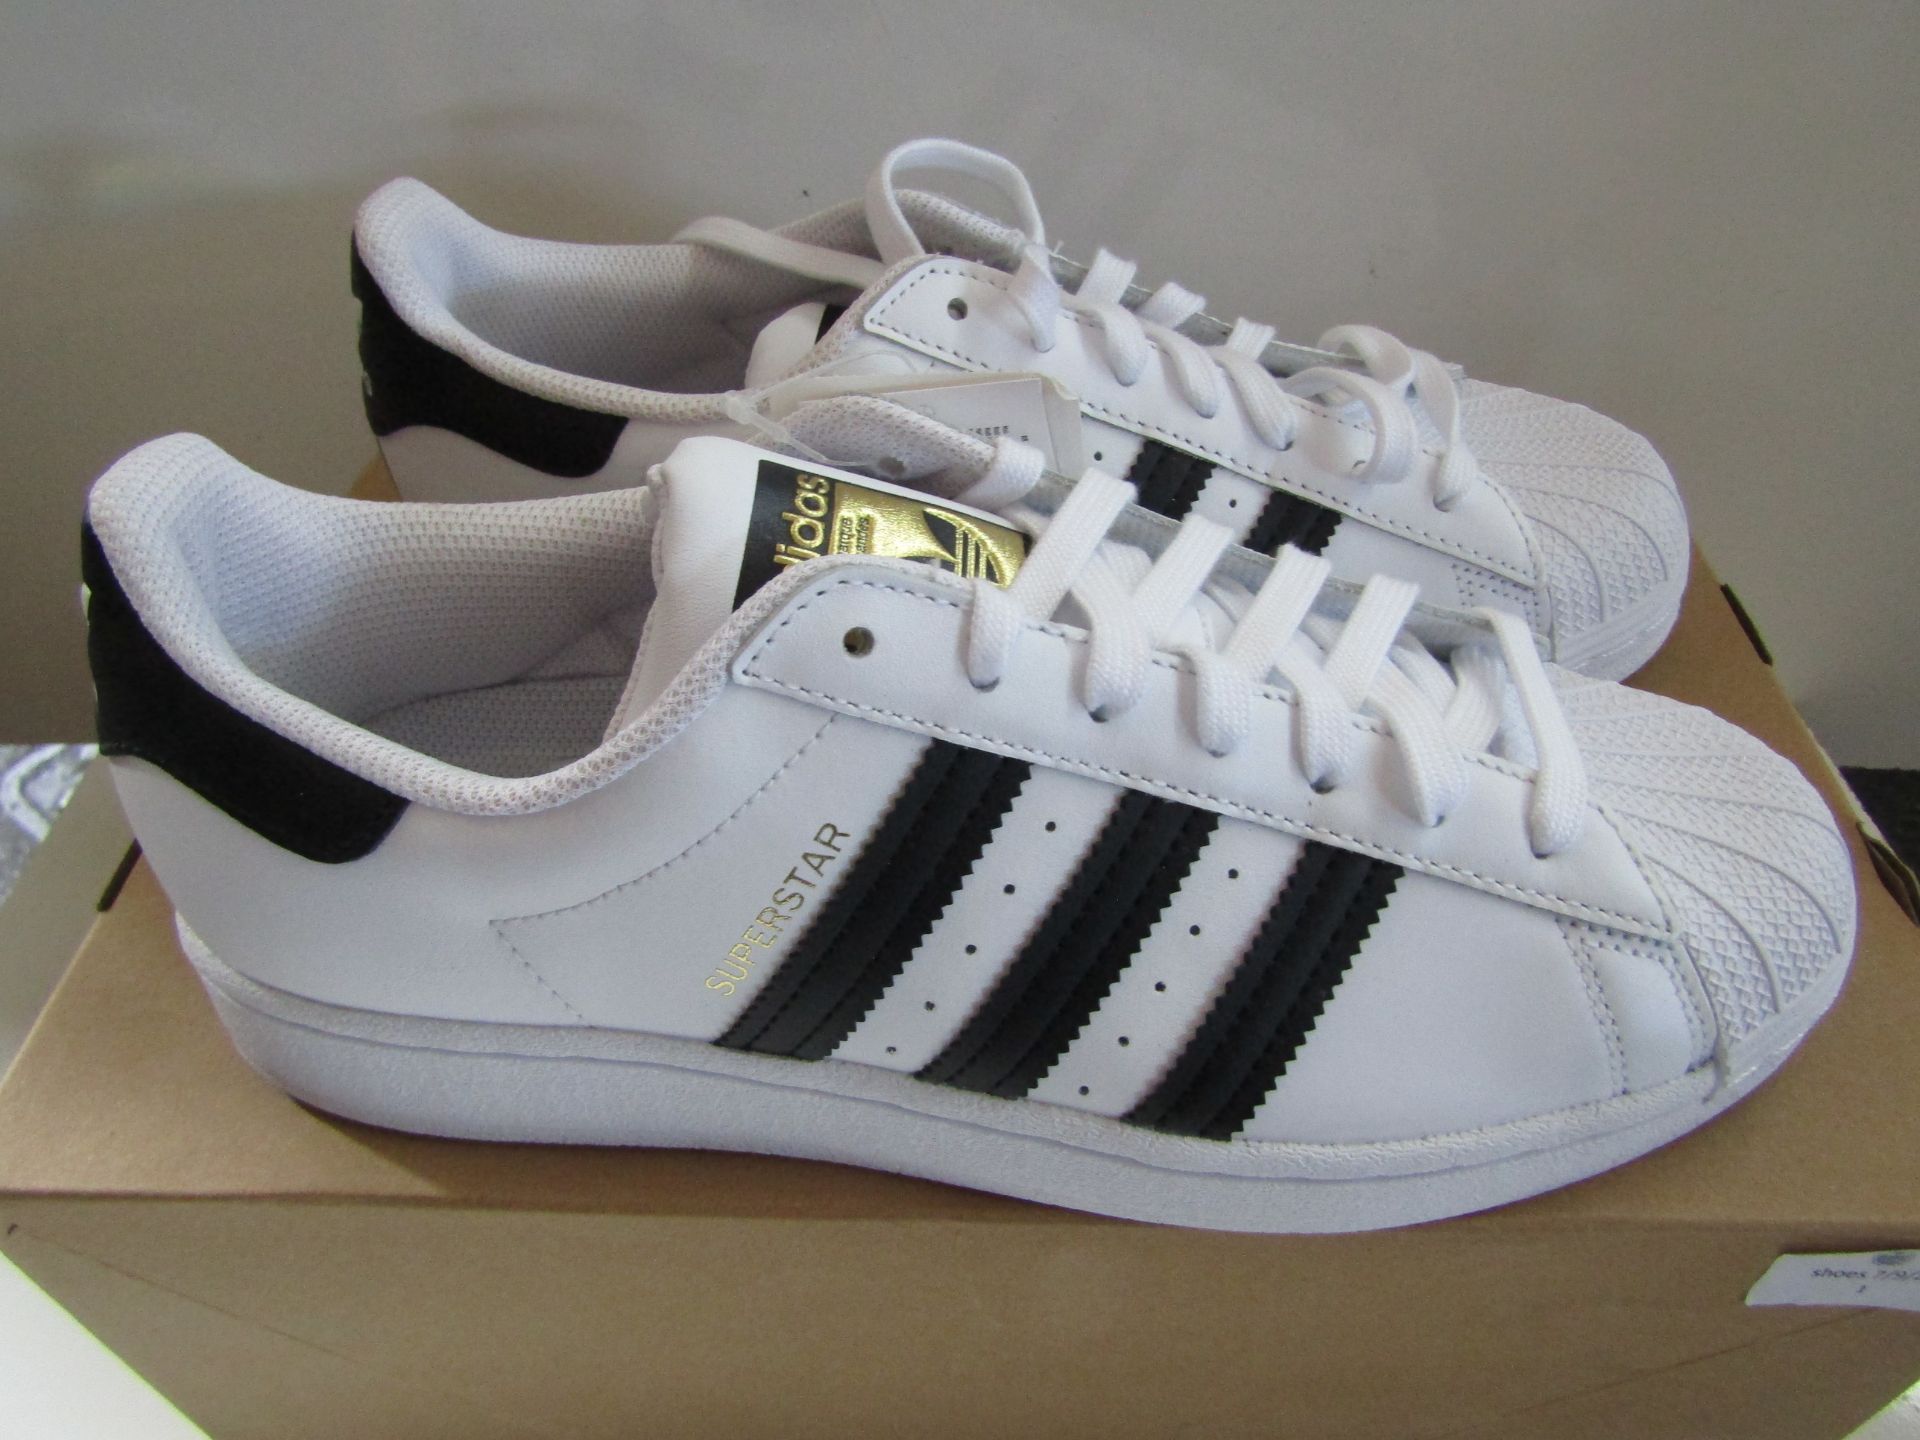 Adidas Superstar Black/White Trainers Size 8 New & Boxed